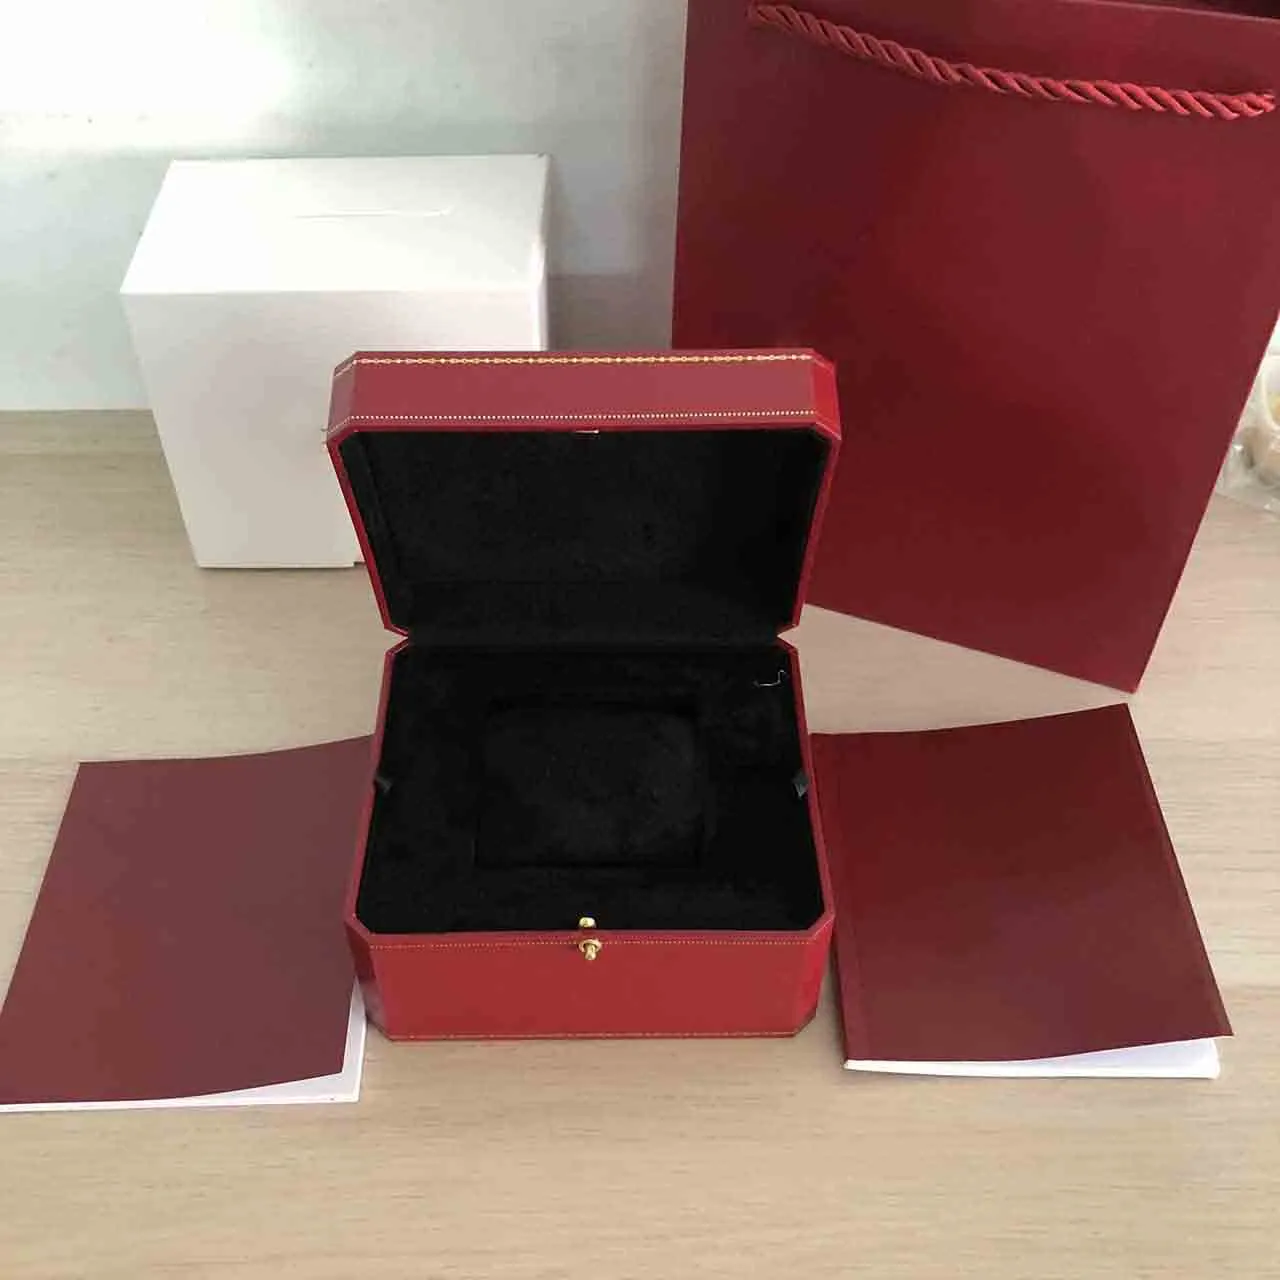 Vari orologi Box Collector Luxury Quality High End in legno per brochure Card Tag File Bag Men Watch Red Boxes Gift